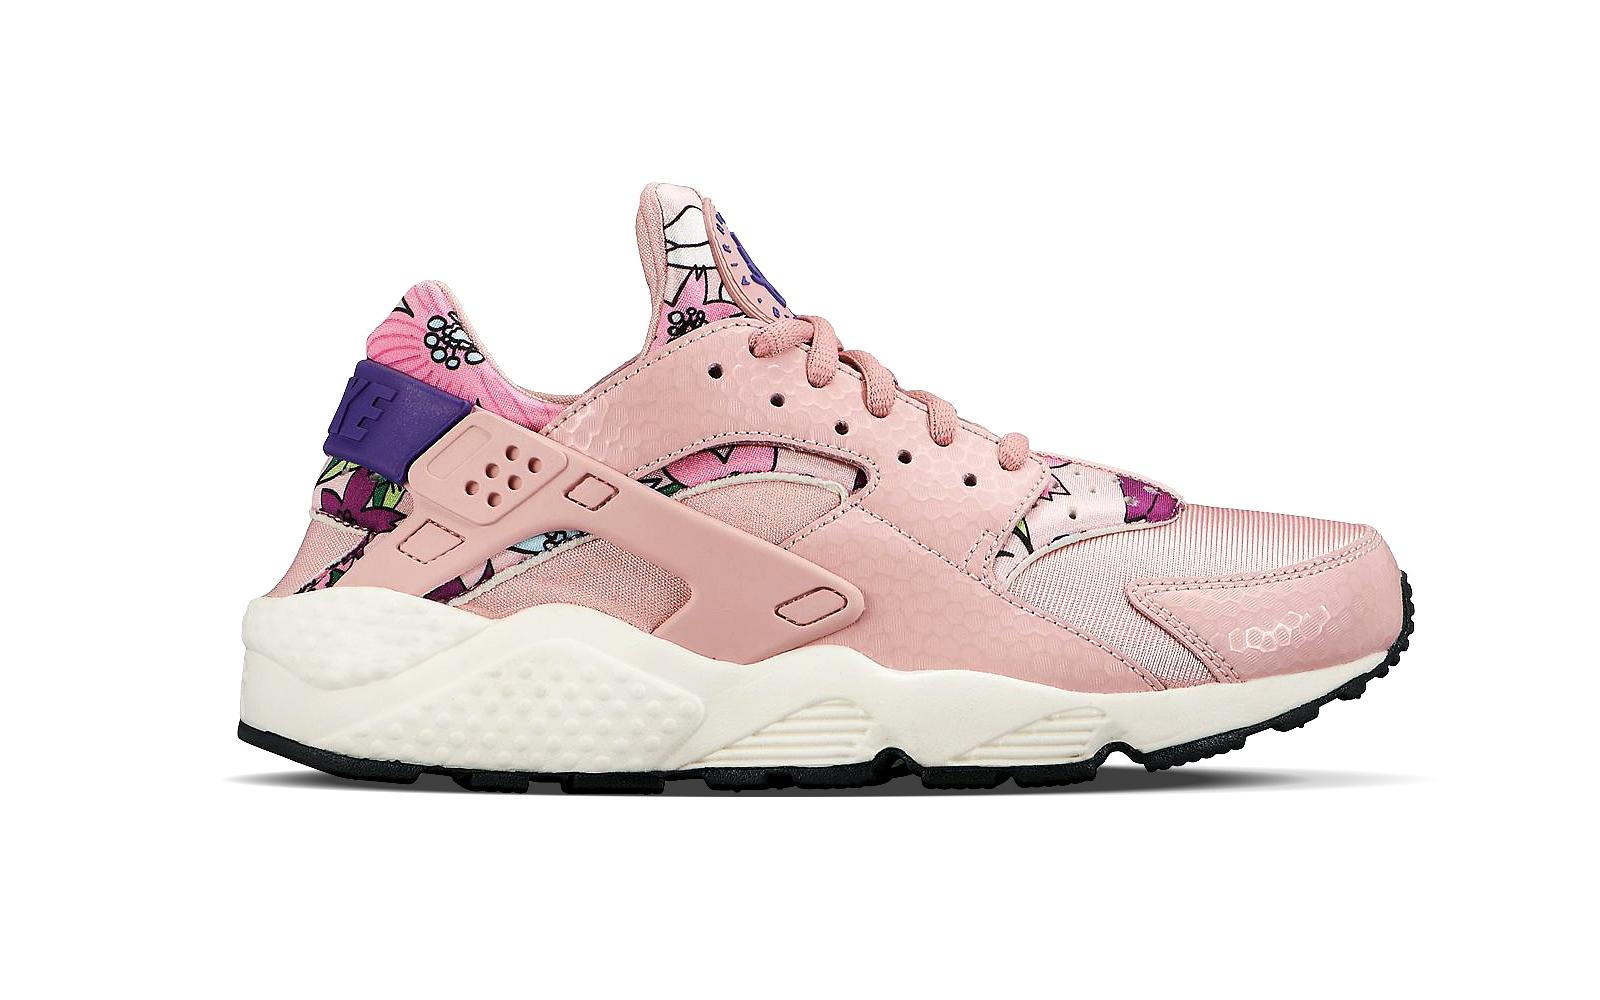 The Sole Supplier on Twitter: "Available NOW. Nike Air Huarache Aloha Pink  Direct Link &gt; http://t.co/g3yBWBtJqb http://t.co/D0VS8AI8xk" / Twitter